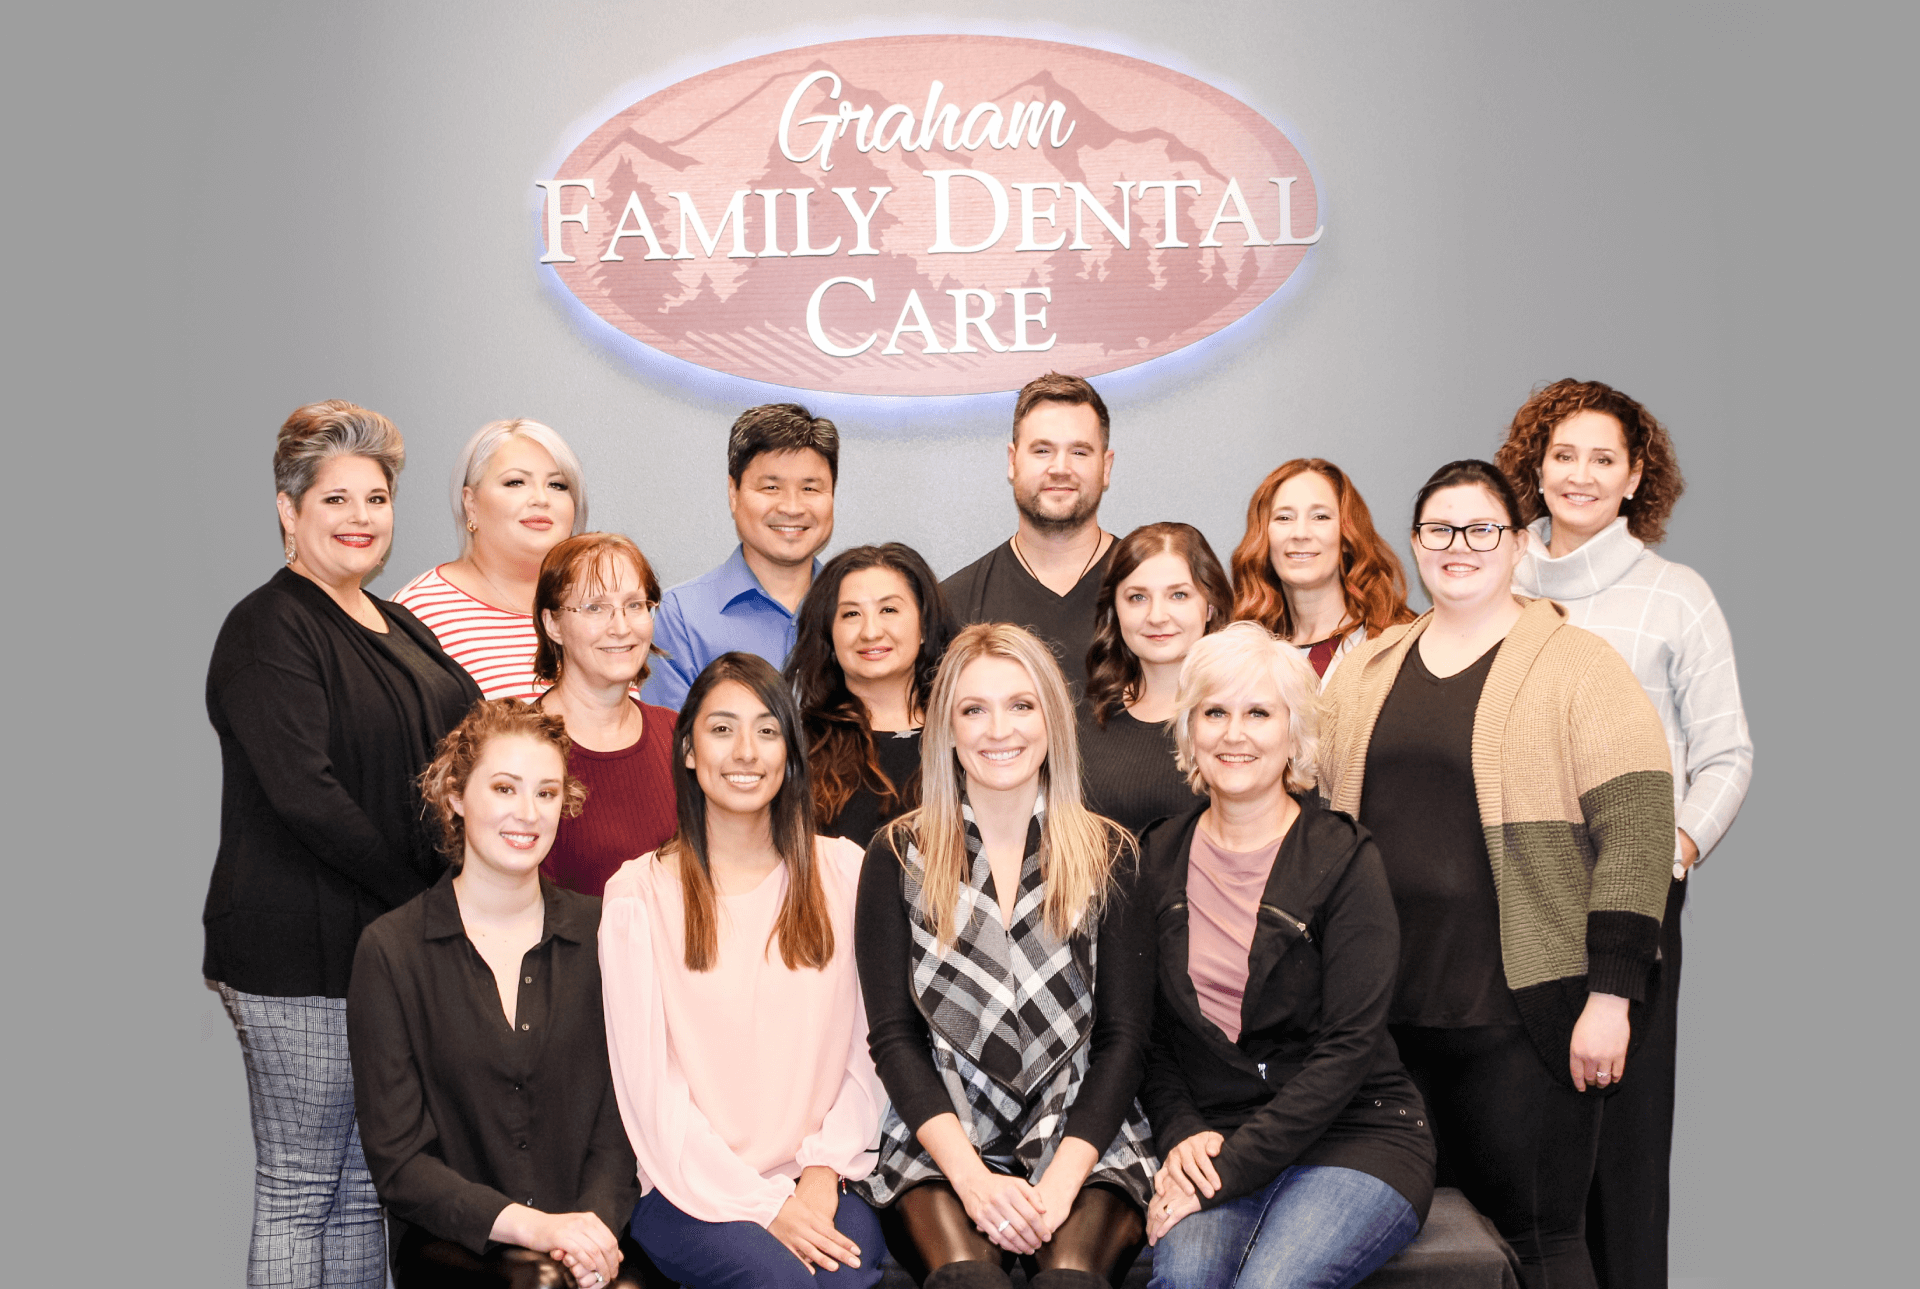 The entire Graham Family Dental Care team standing together under our logo in the office